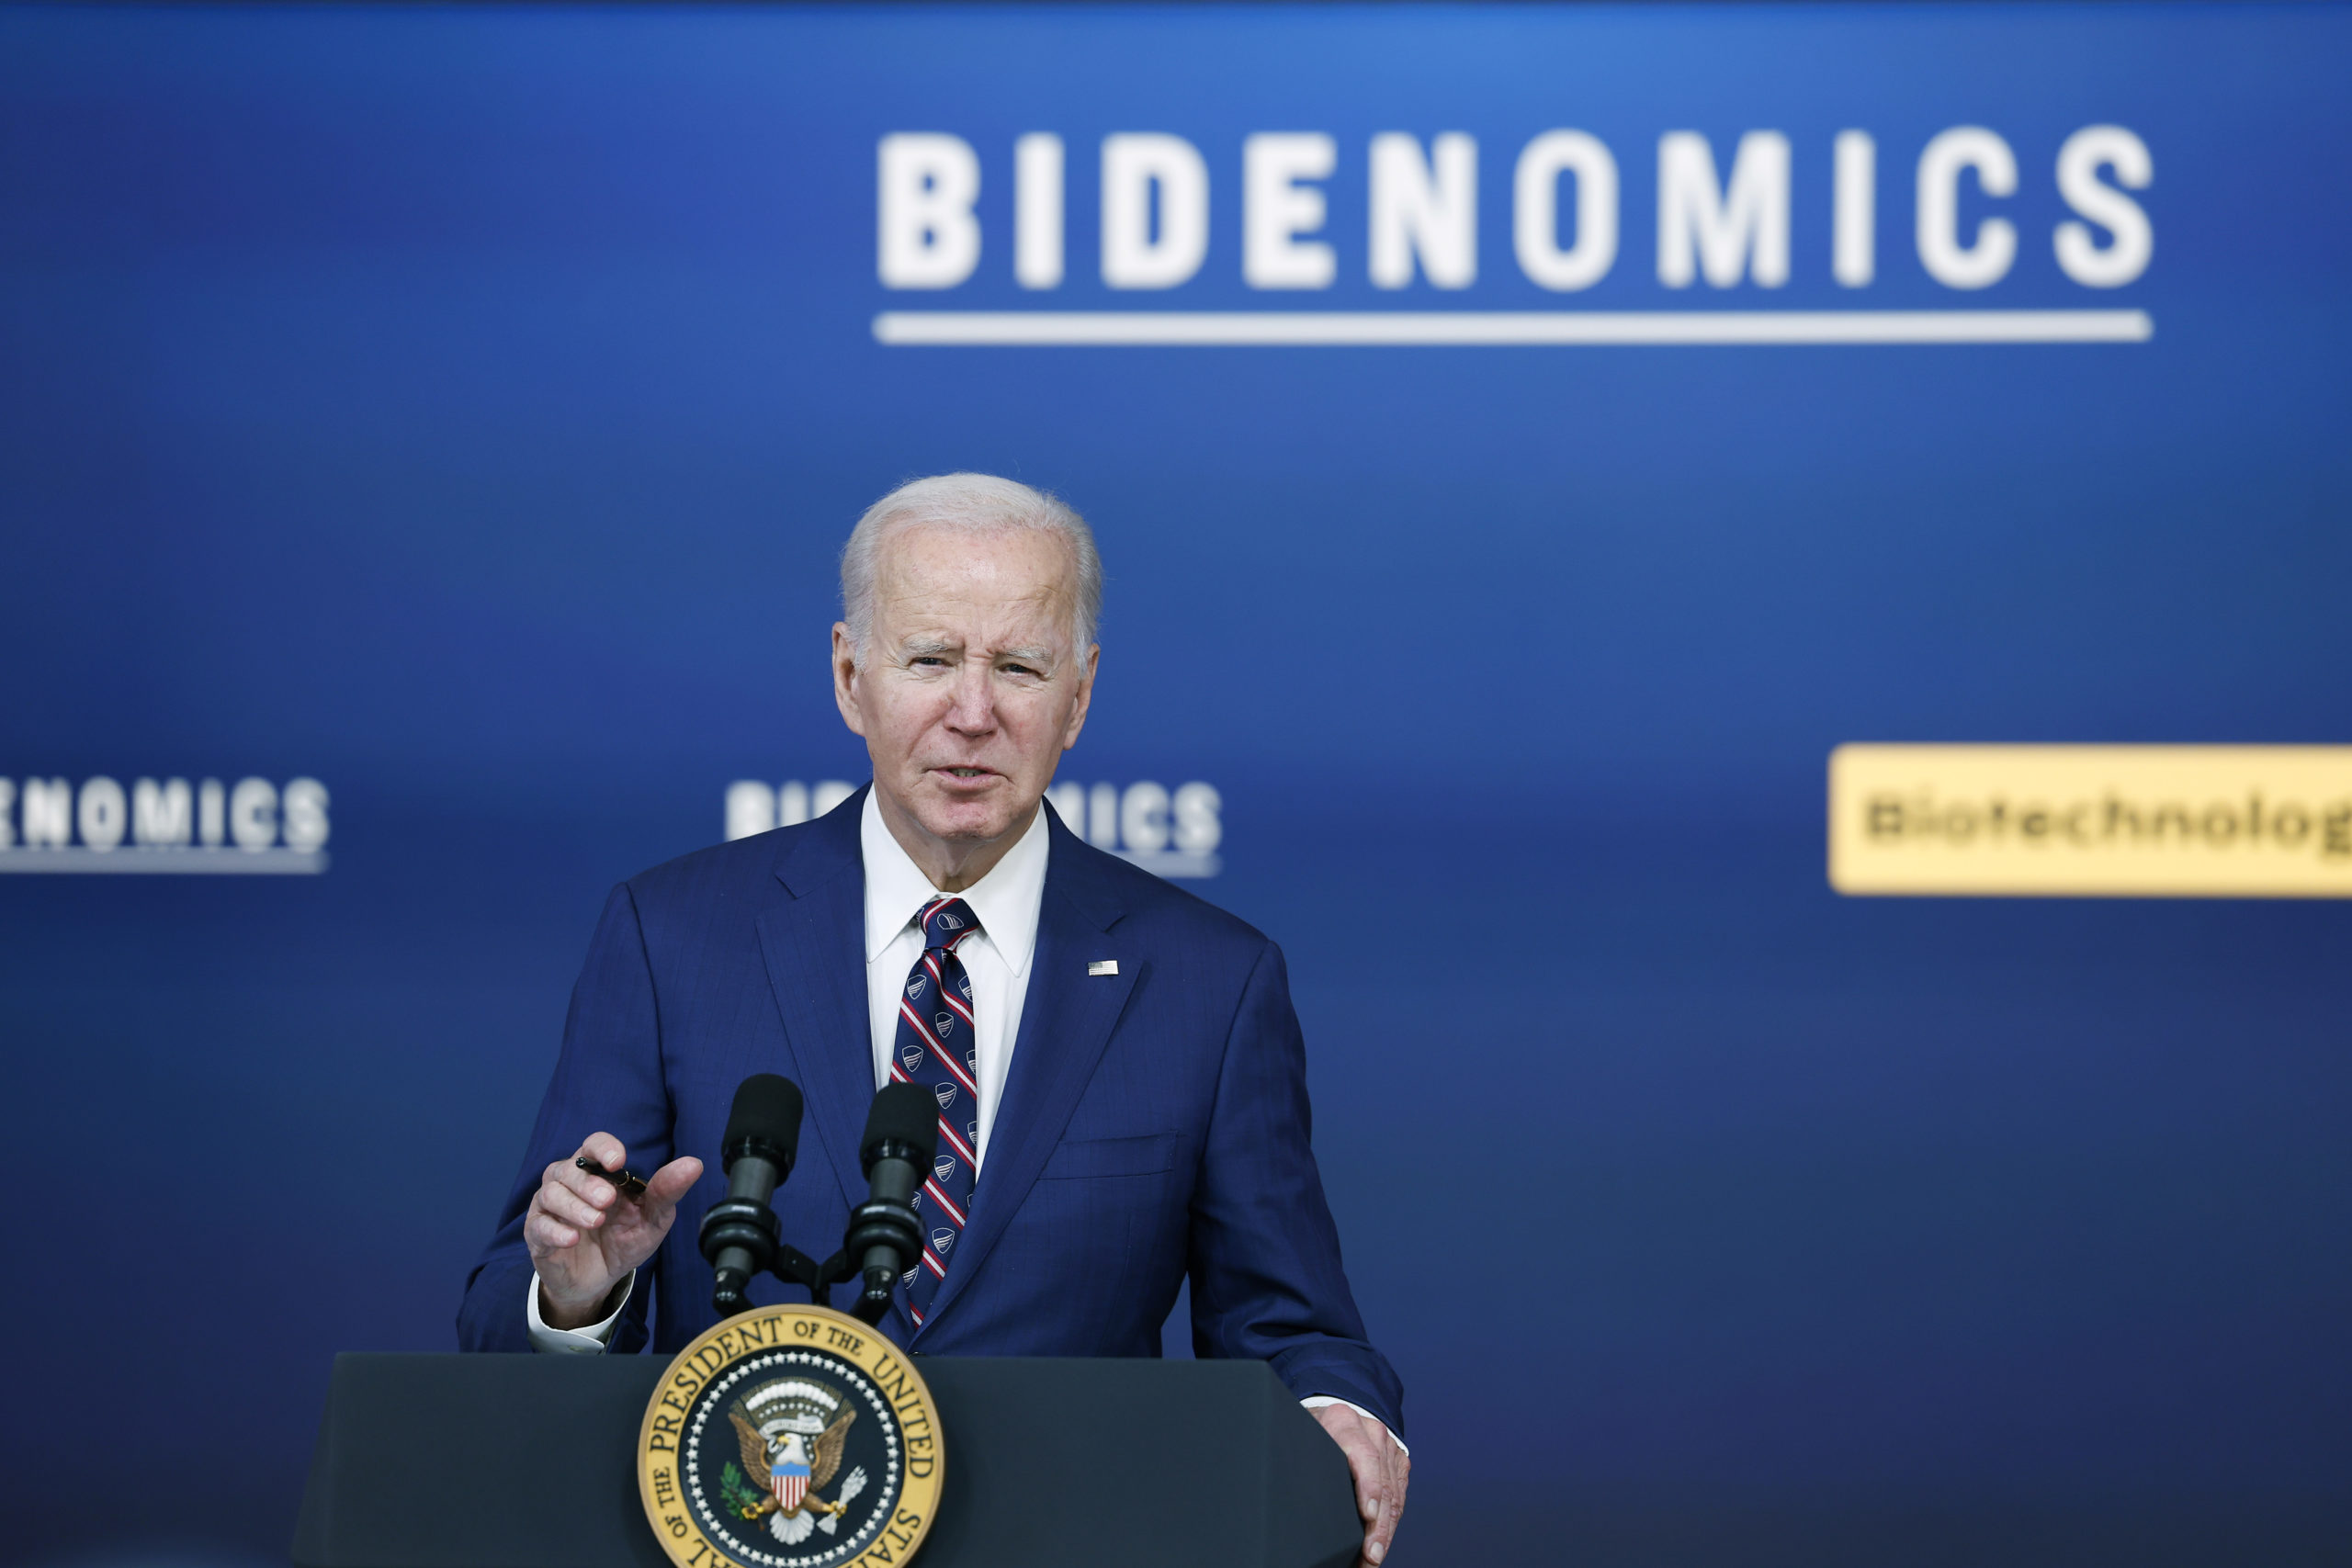 WASHINGTON, DC - OCTOBER 23: U.S. President Joe Biden speaks during an event at the South Court Auditorium in the Eisenhower Executive Office Building at the White House on October 23, 2023 in Washington, DC. During the event Biden spoke on how his administration's "Bidenomics" agenda would invest in technology for people in the United States. (Photo by Anna Moneymaker/Getty Images)